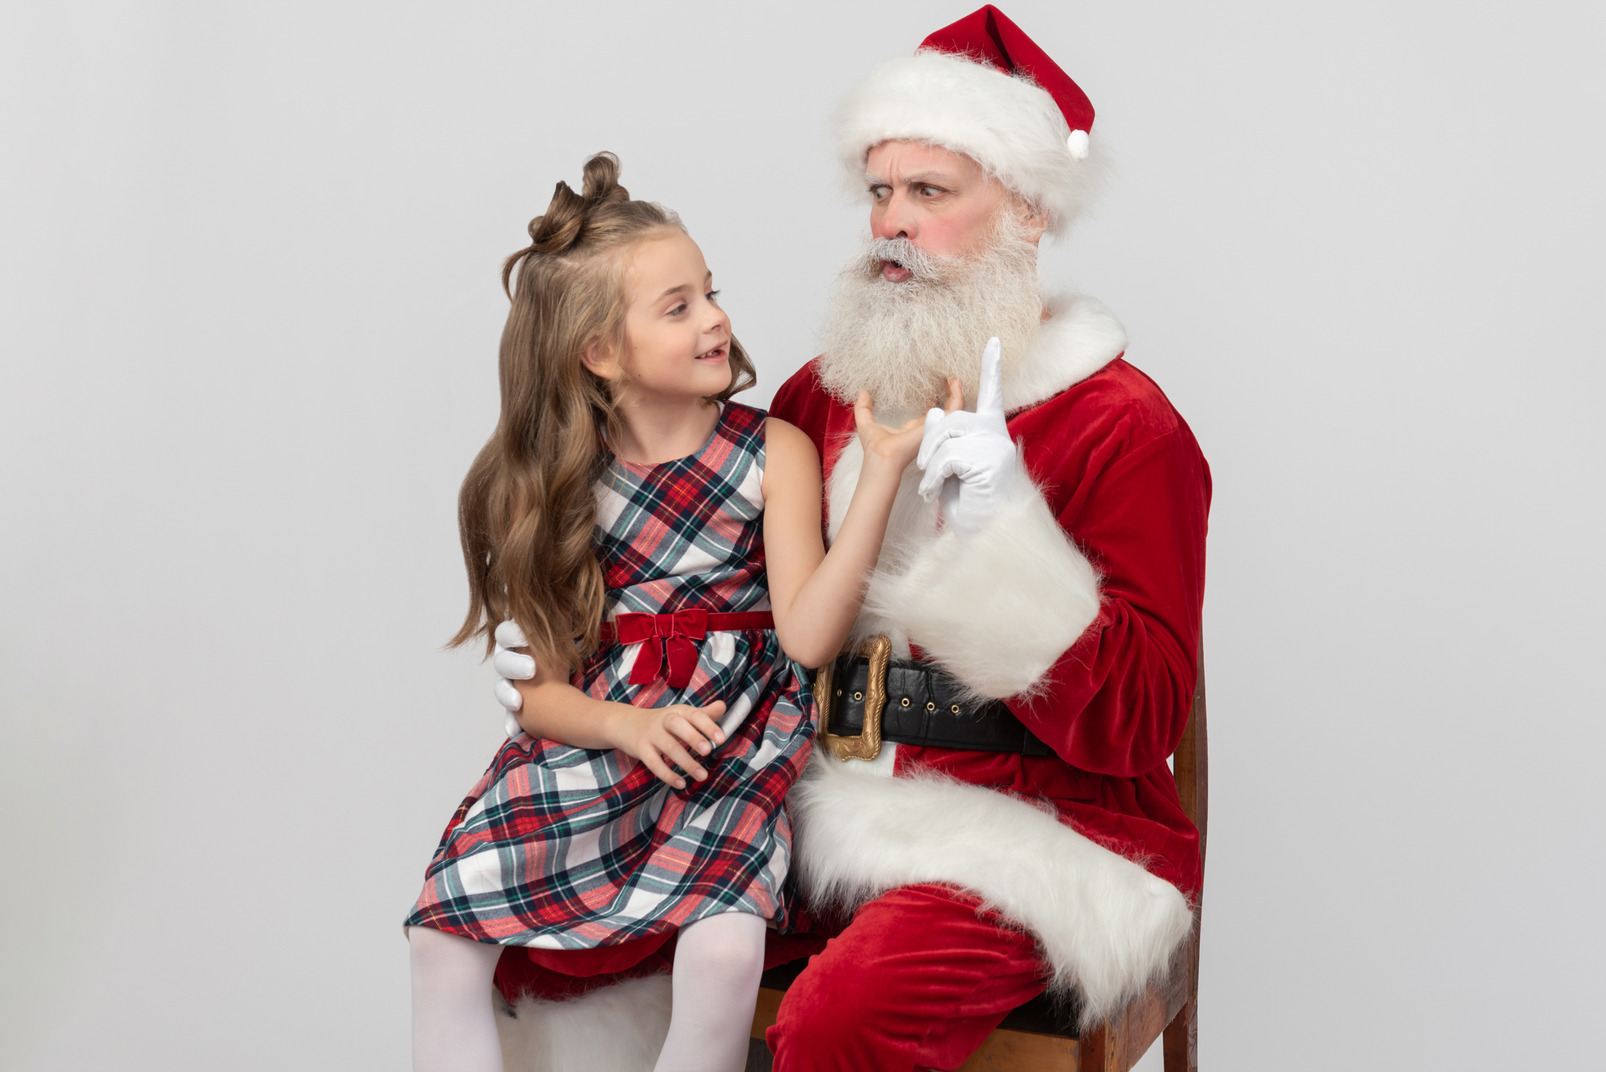 Santa pointing out that kid girl can't touch his beard